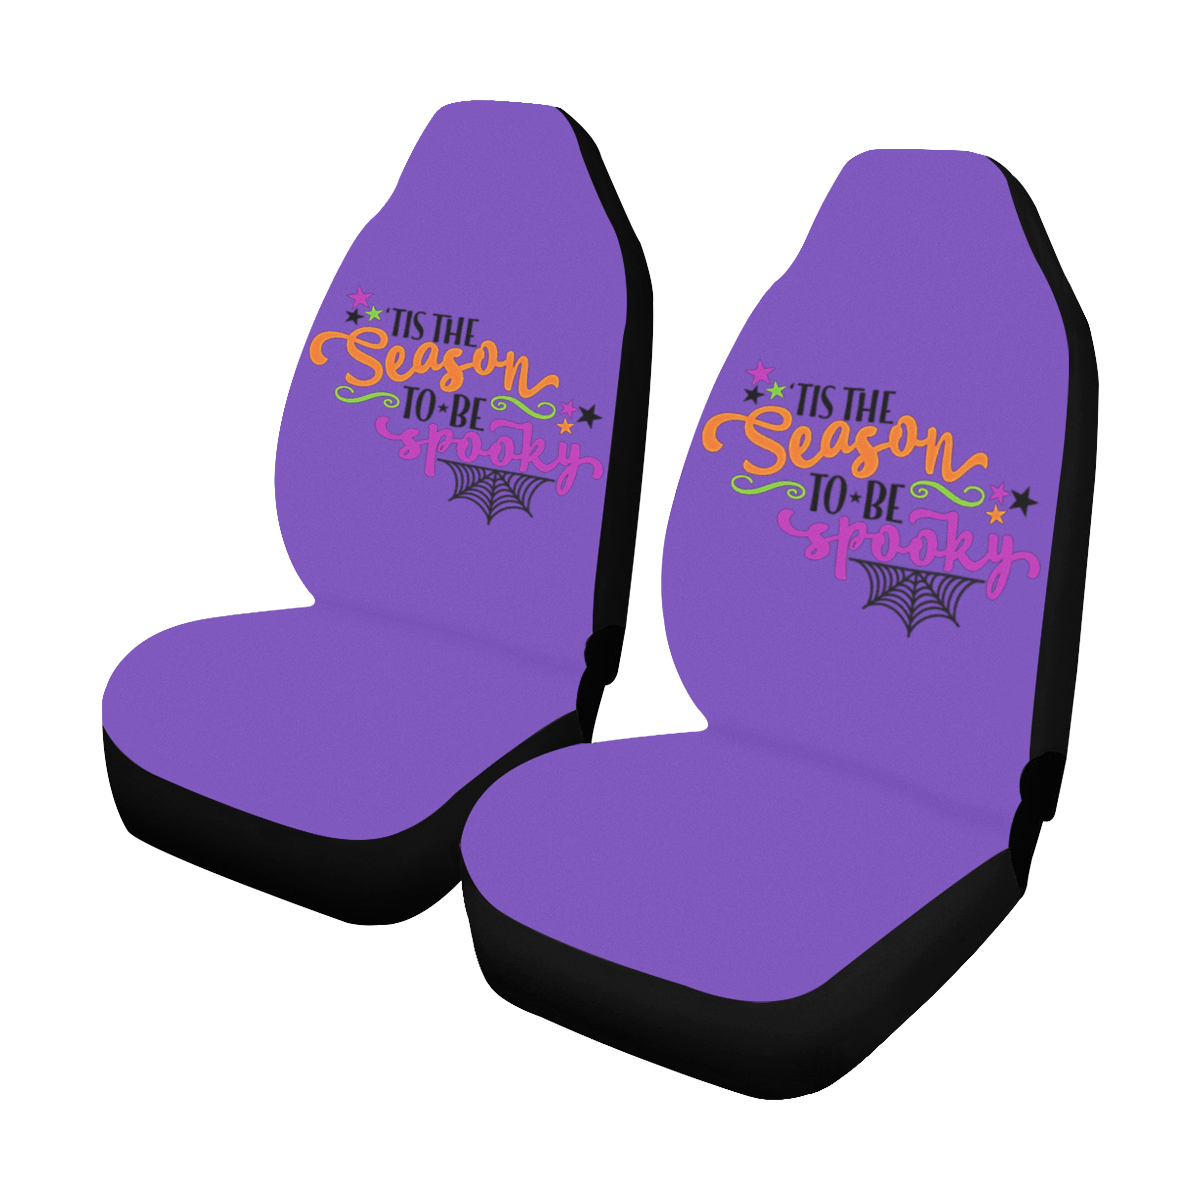 The Season To Be Spooky Car Seat Covers (Set of 2)